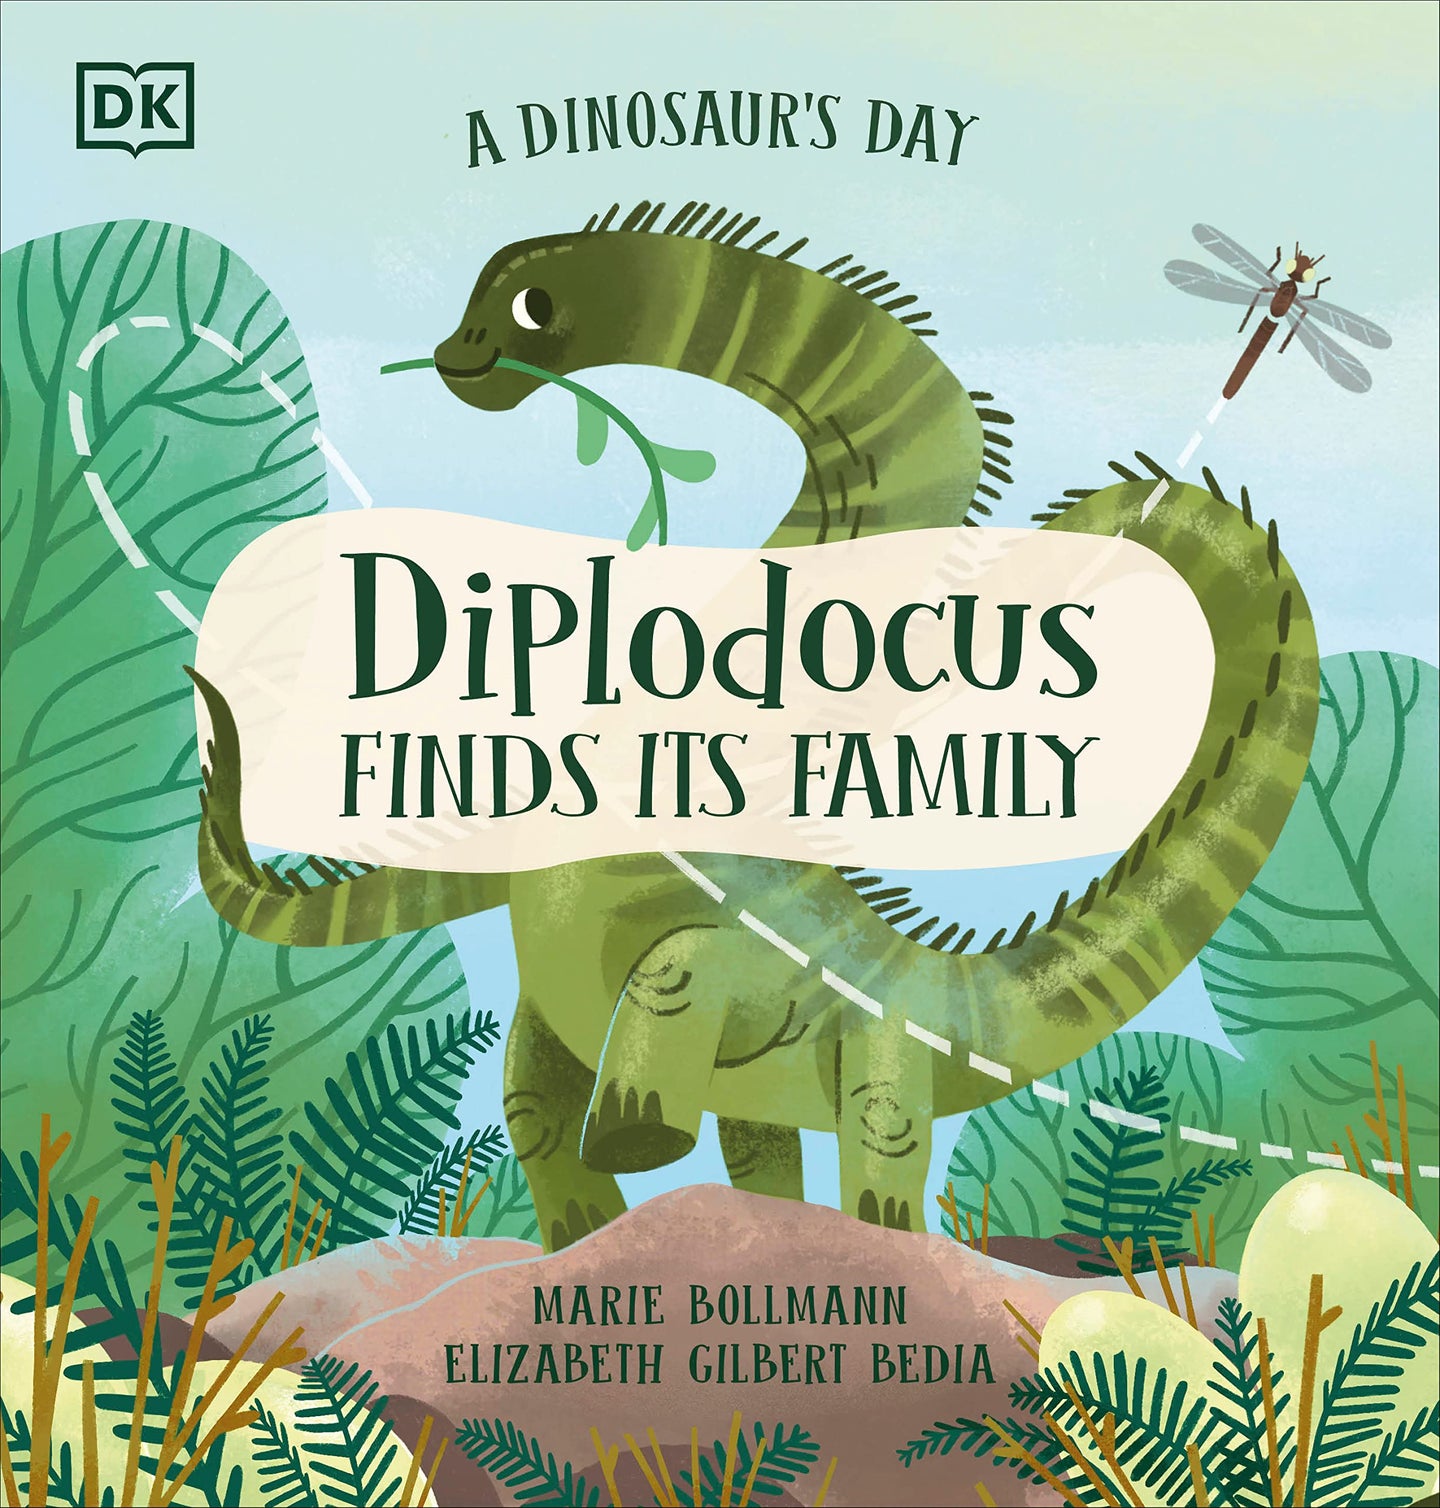 A Dinosaur’s Day: Diplodocus Finds It’s Family